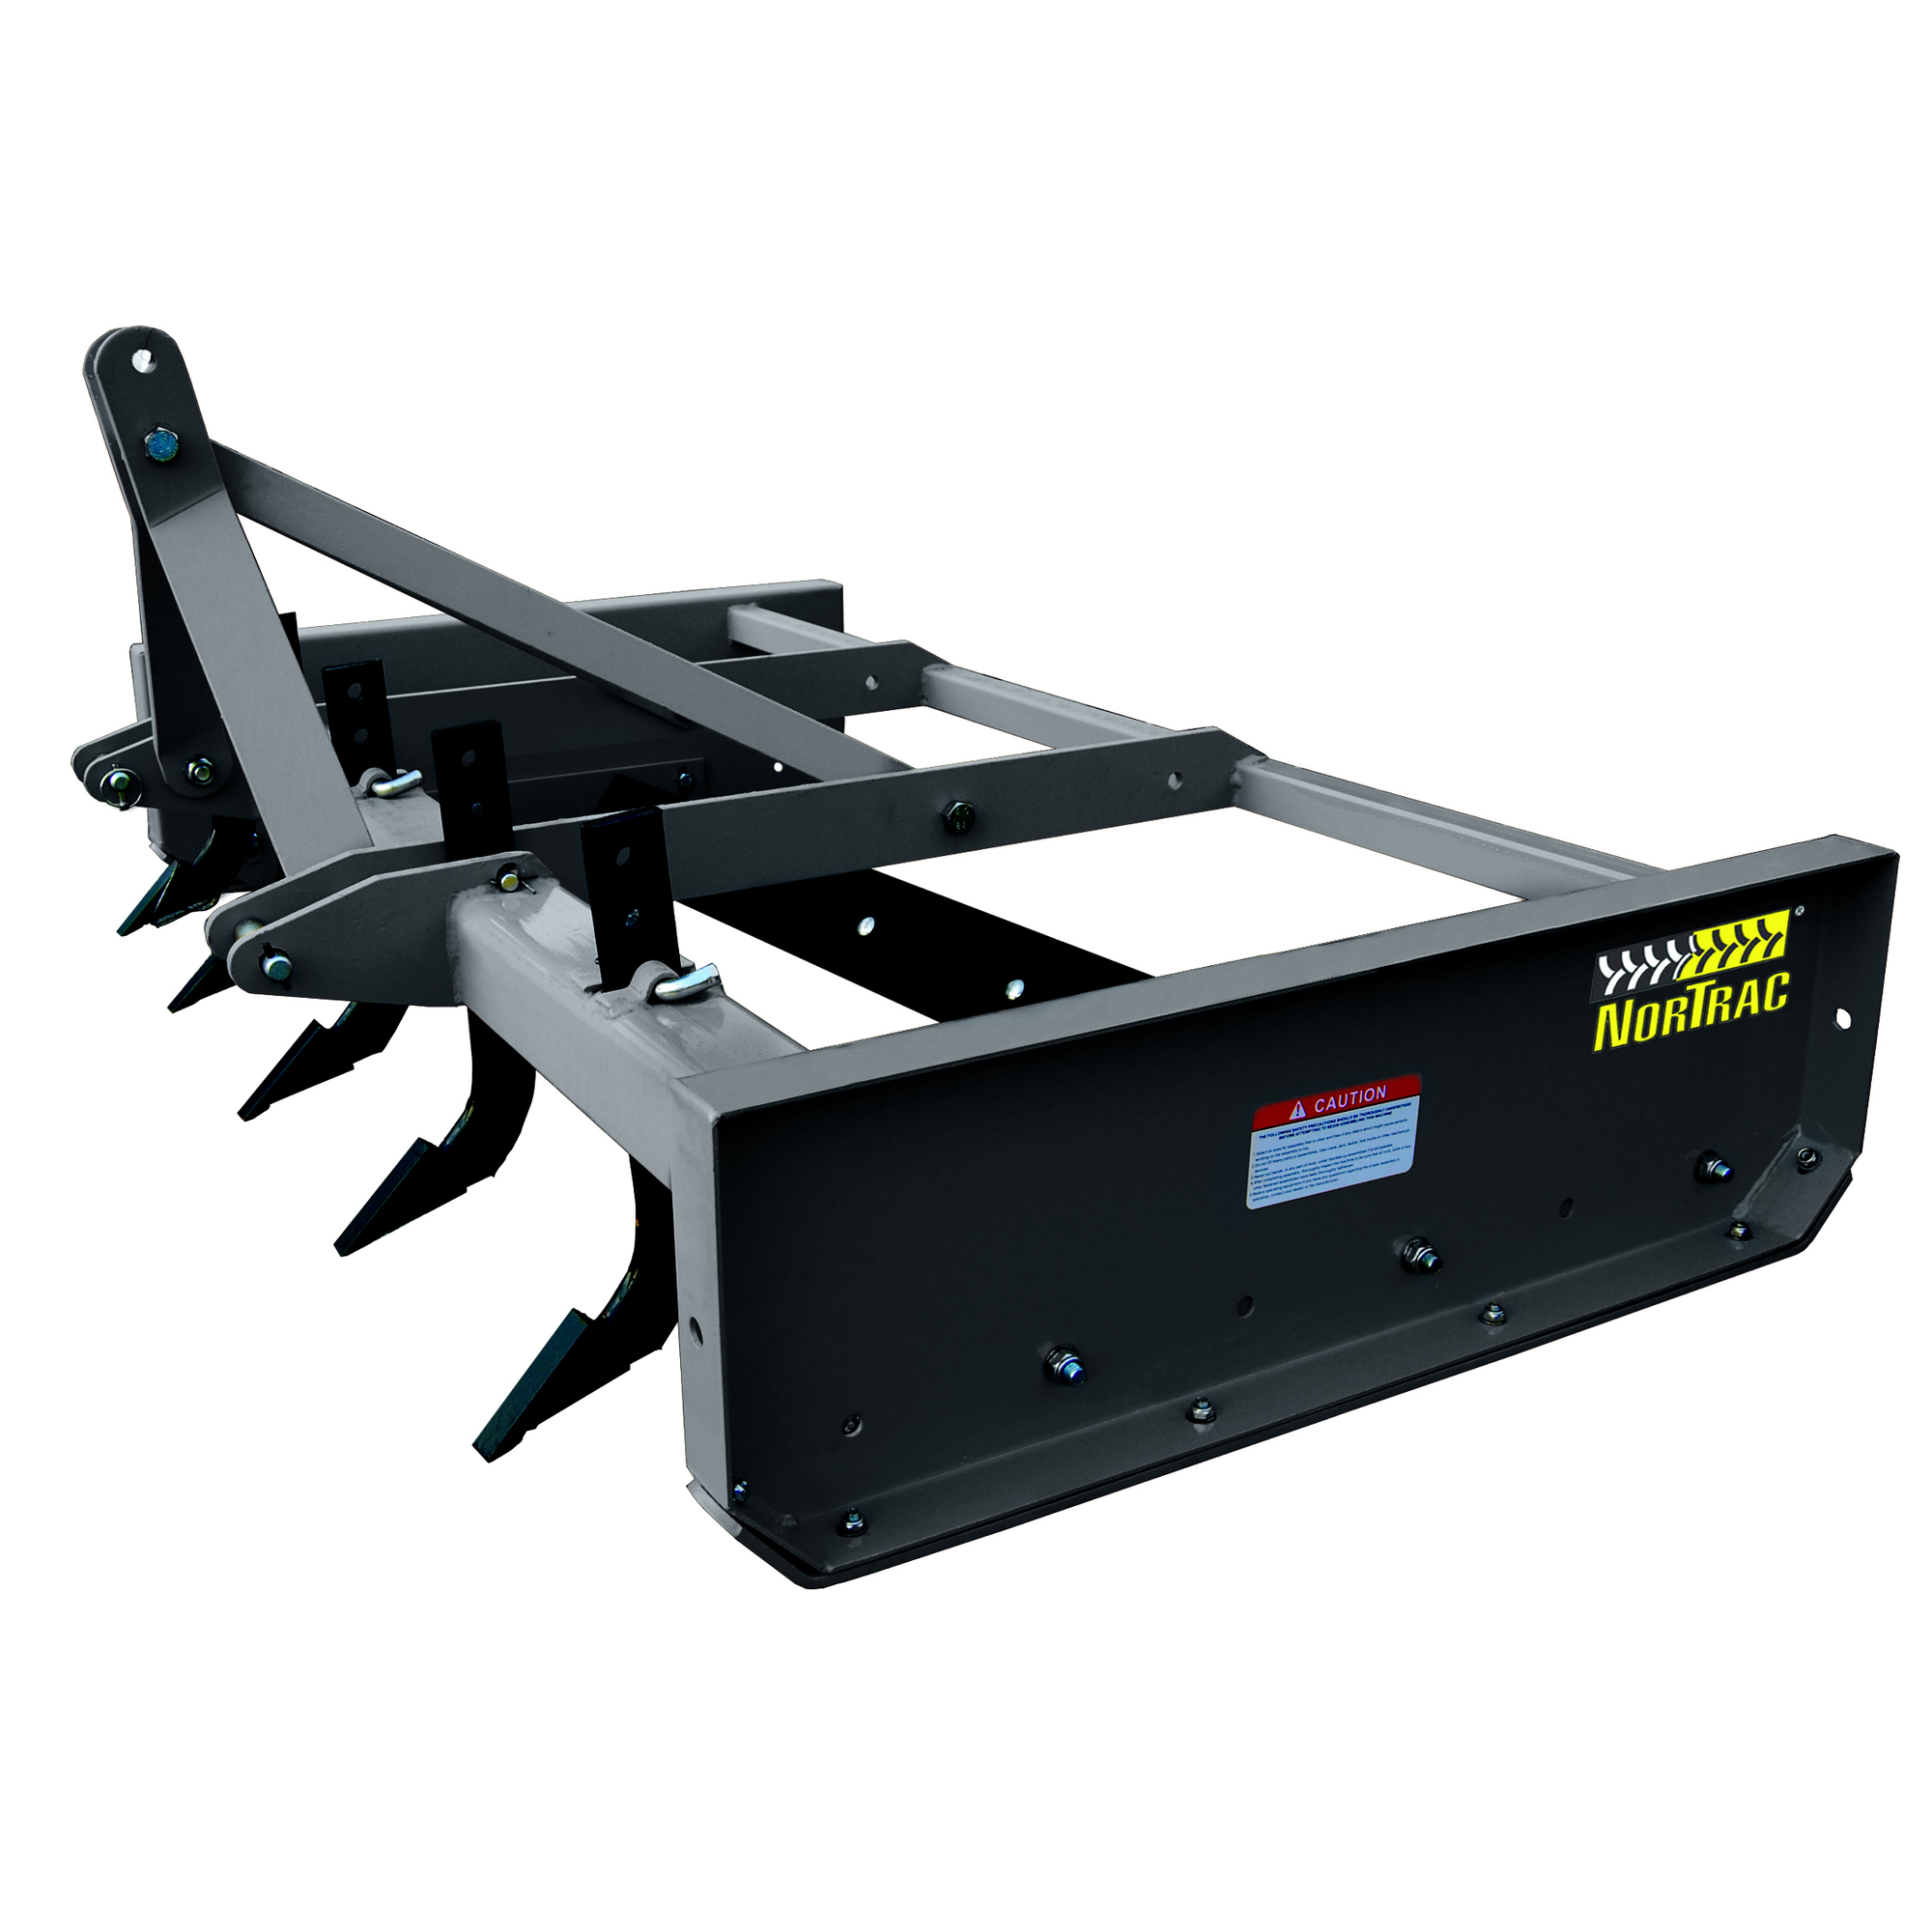 NorTrac 3-Point Box Grader Scraper, 60Inch Working Width, Category 1, Model BE-GS05N